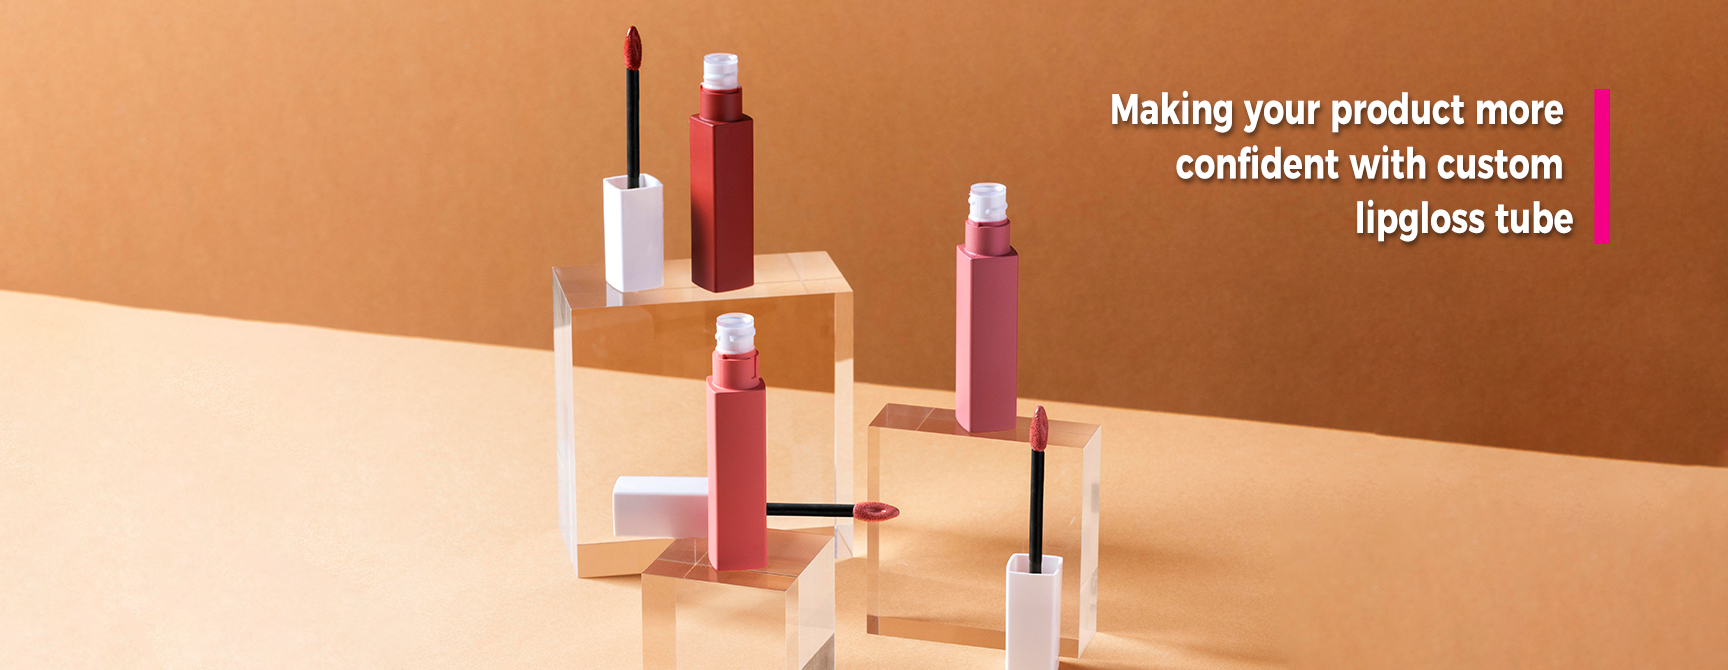 Making your product more confident with custom lipgloss tube